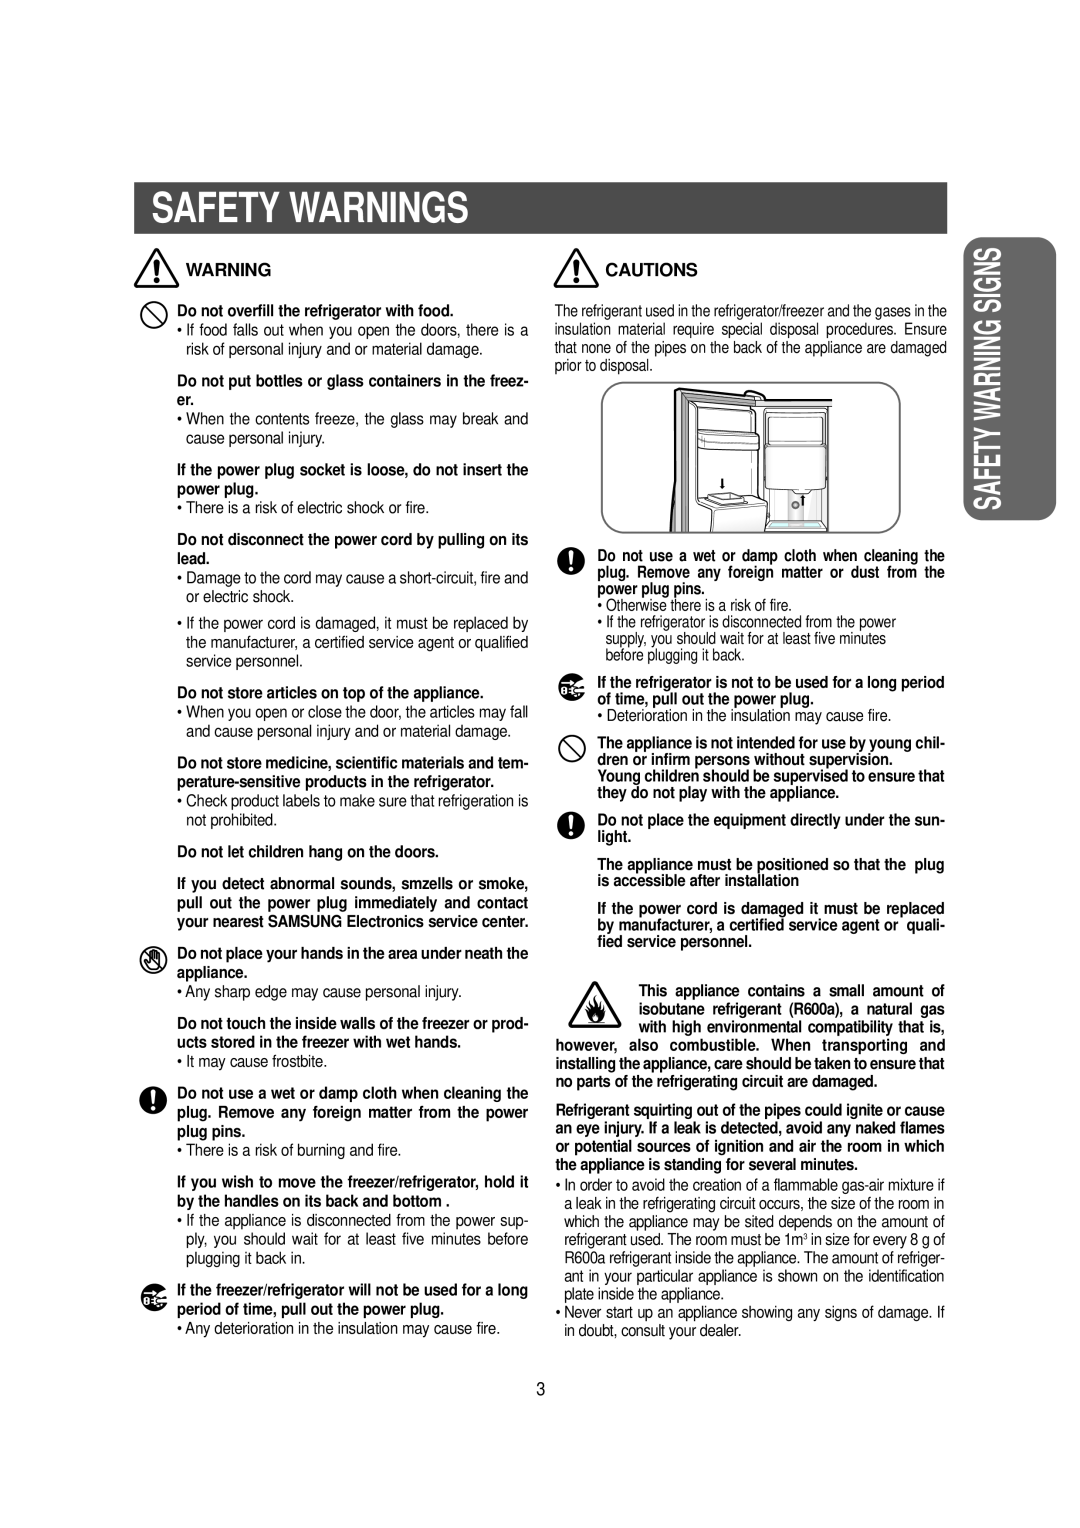 Samsung RS owner manual Safety Warning Signs, Cautions, Safety Warnings 